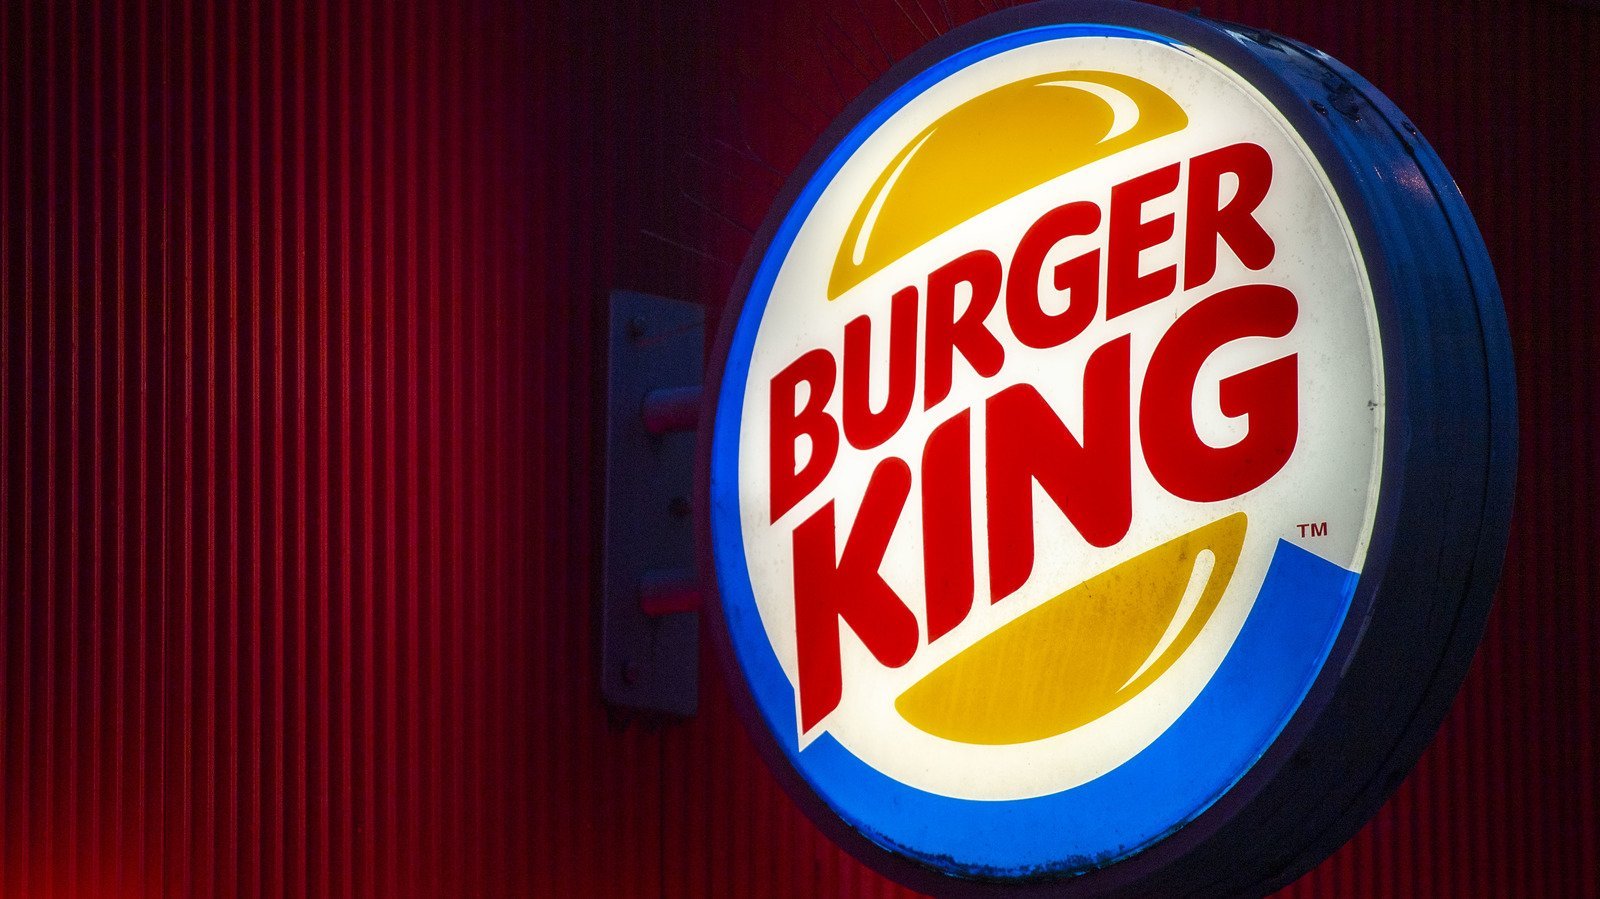 Here's Why Burger King Changed Its Name